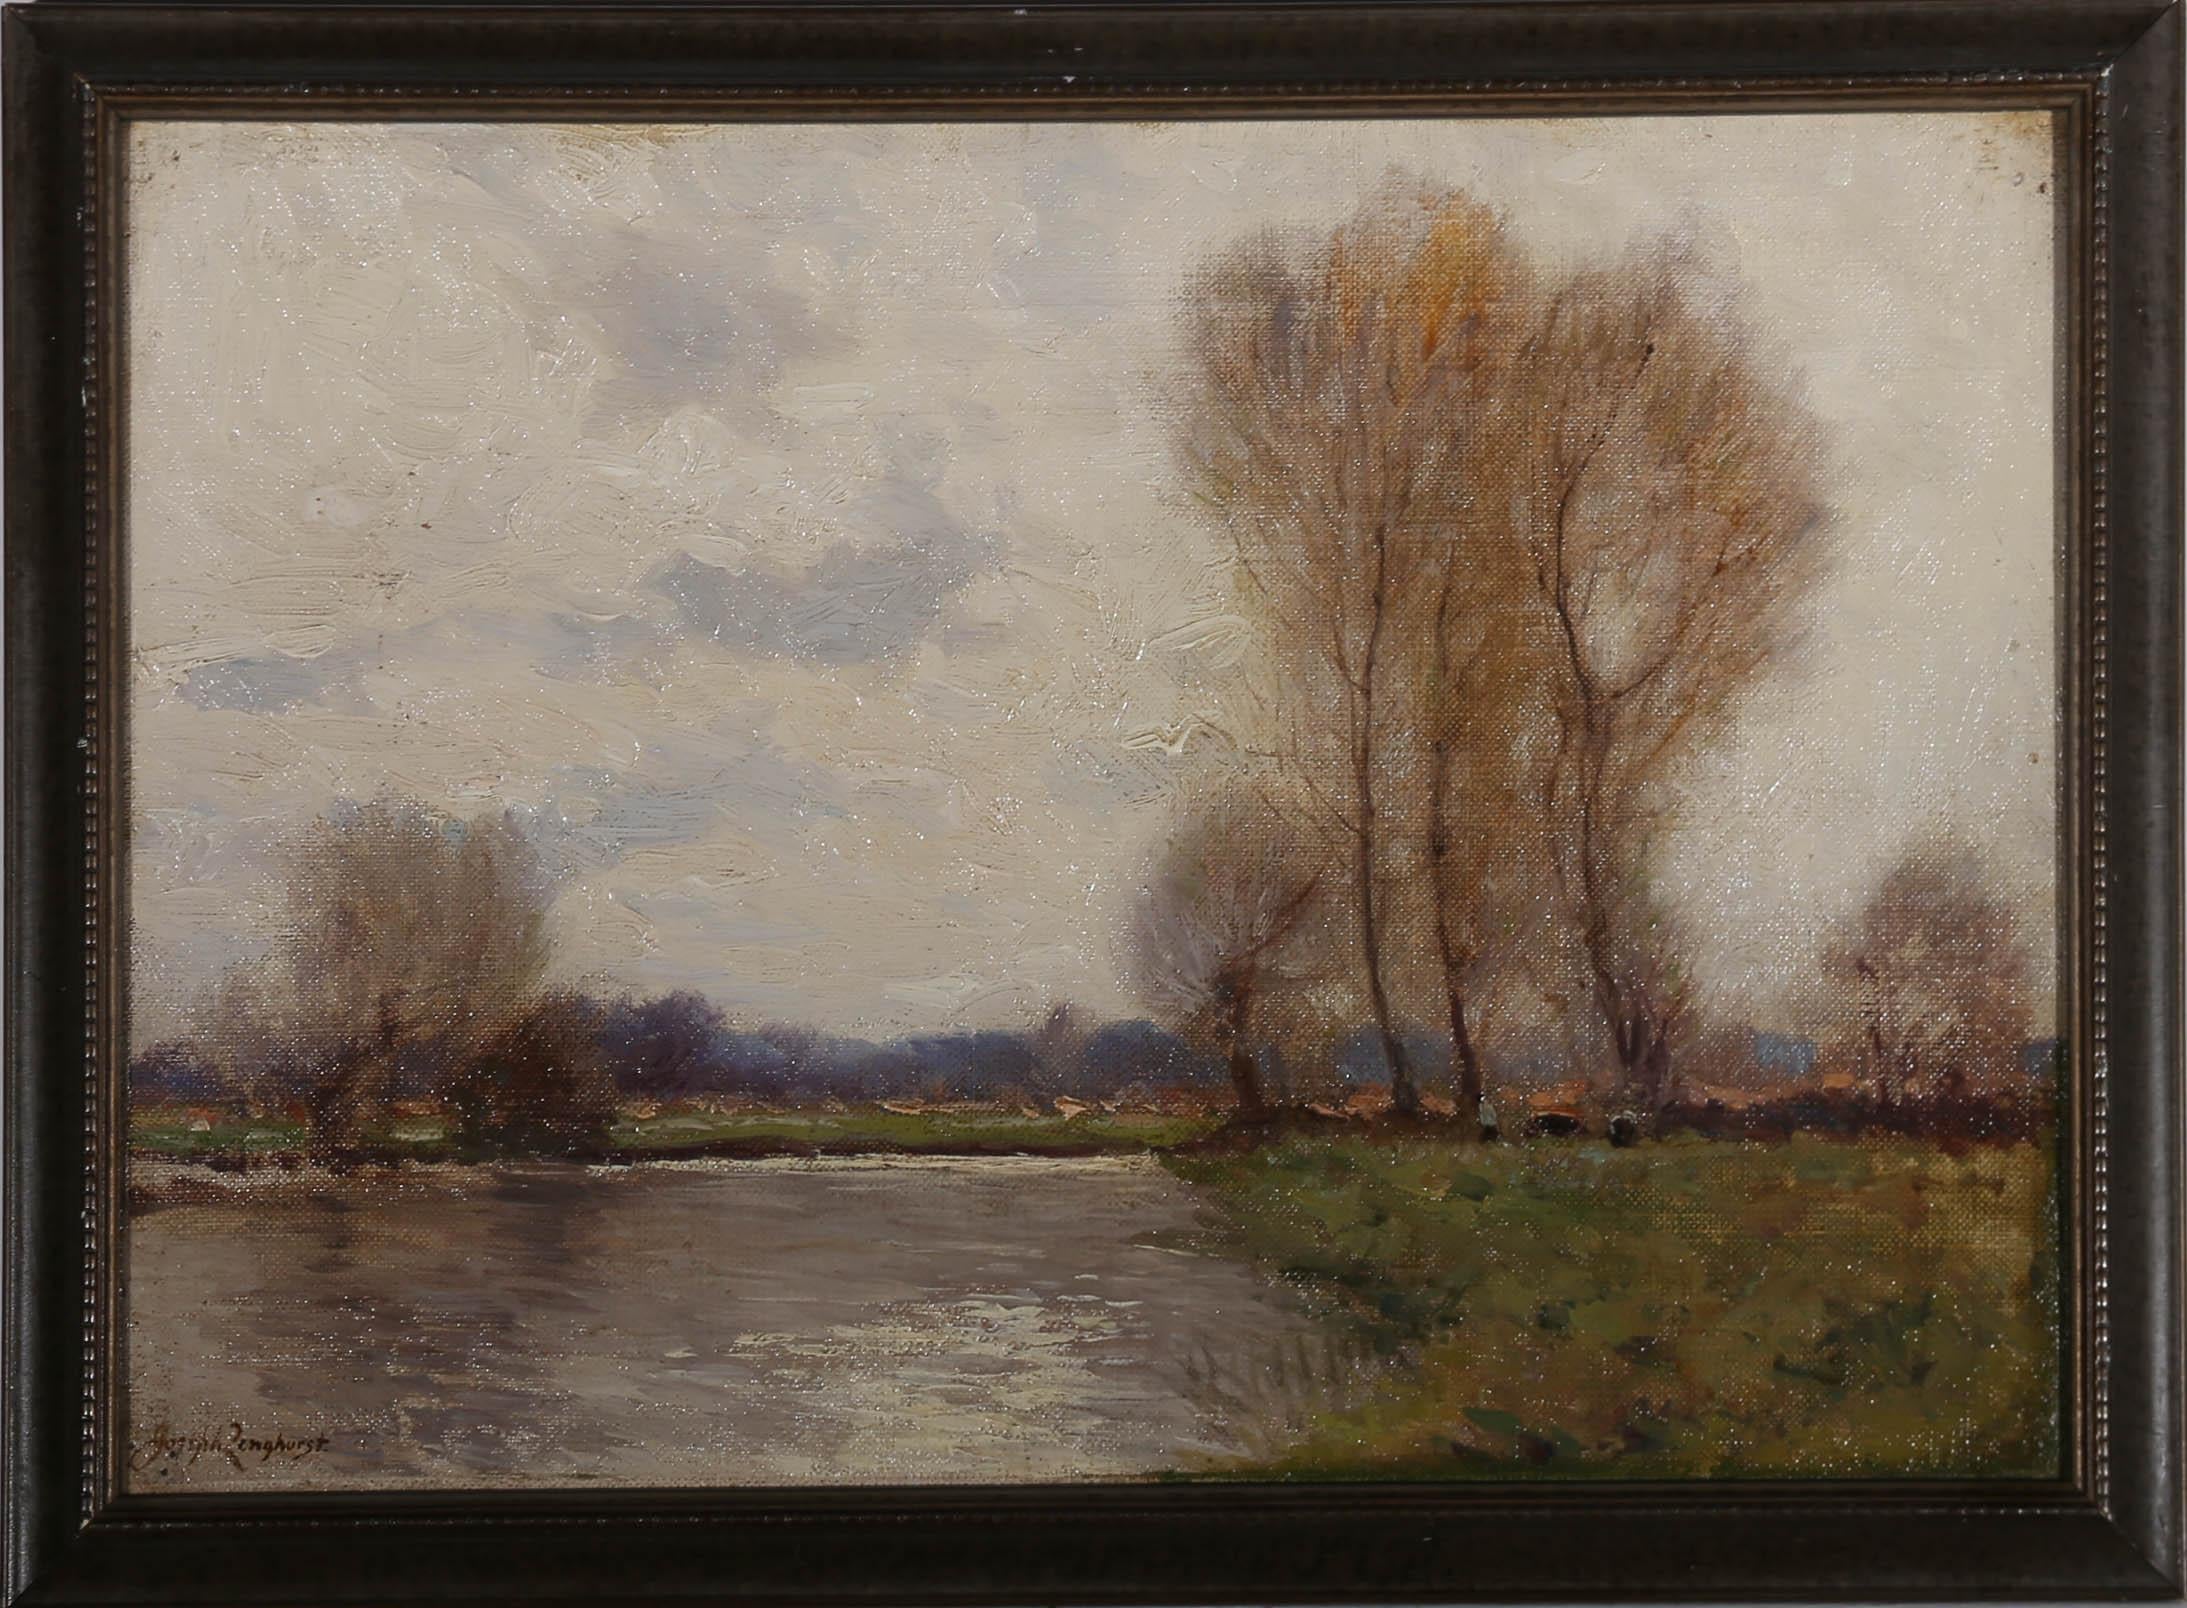 An attractive impressionistic painting by British artist Joseph Longhurst (1874-1922), depicting rising water levels in a quiet countryside location. The river in this scene looks ready to flood with the next spell of heavy rain. To the right of the